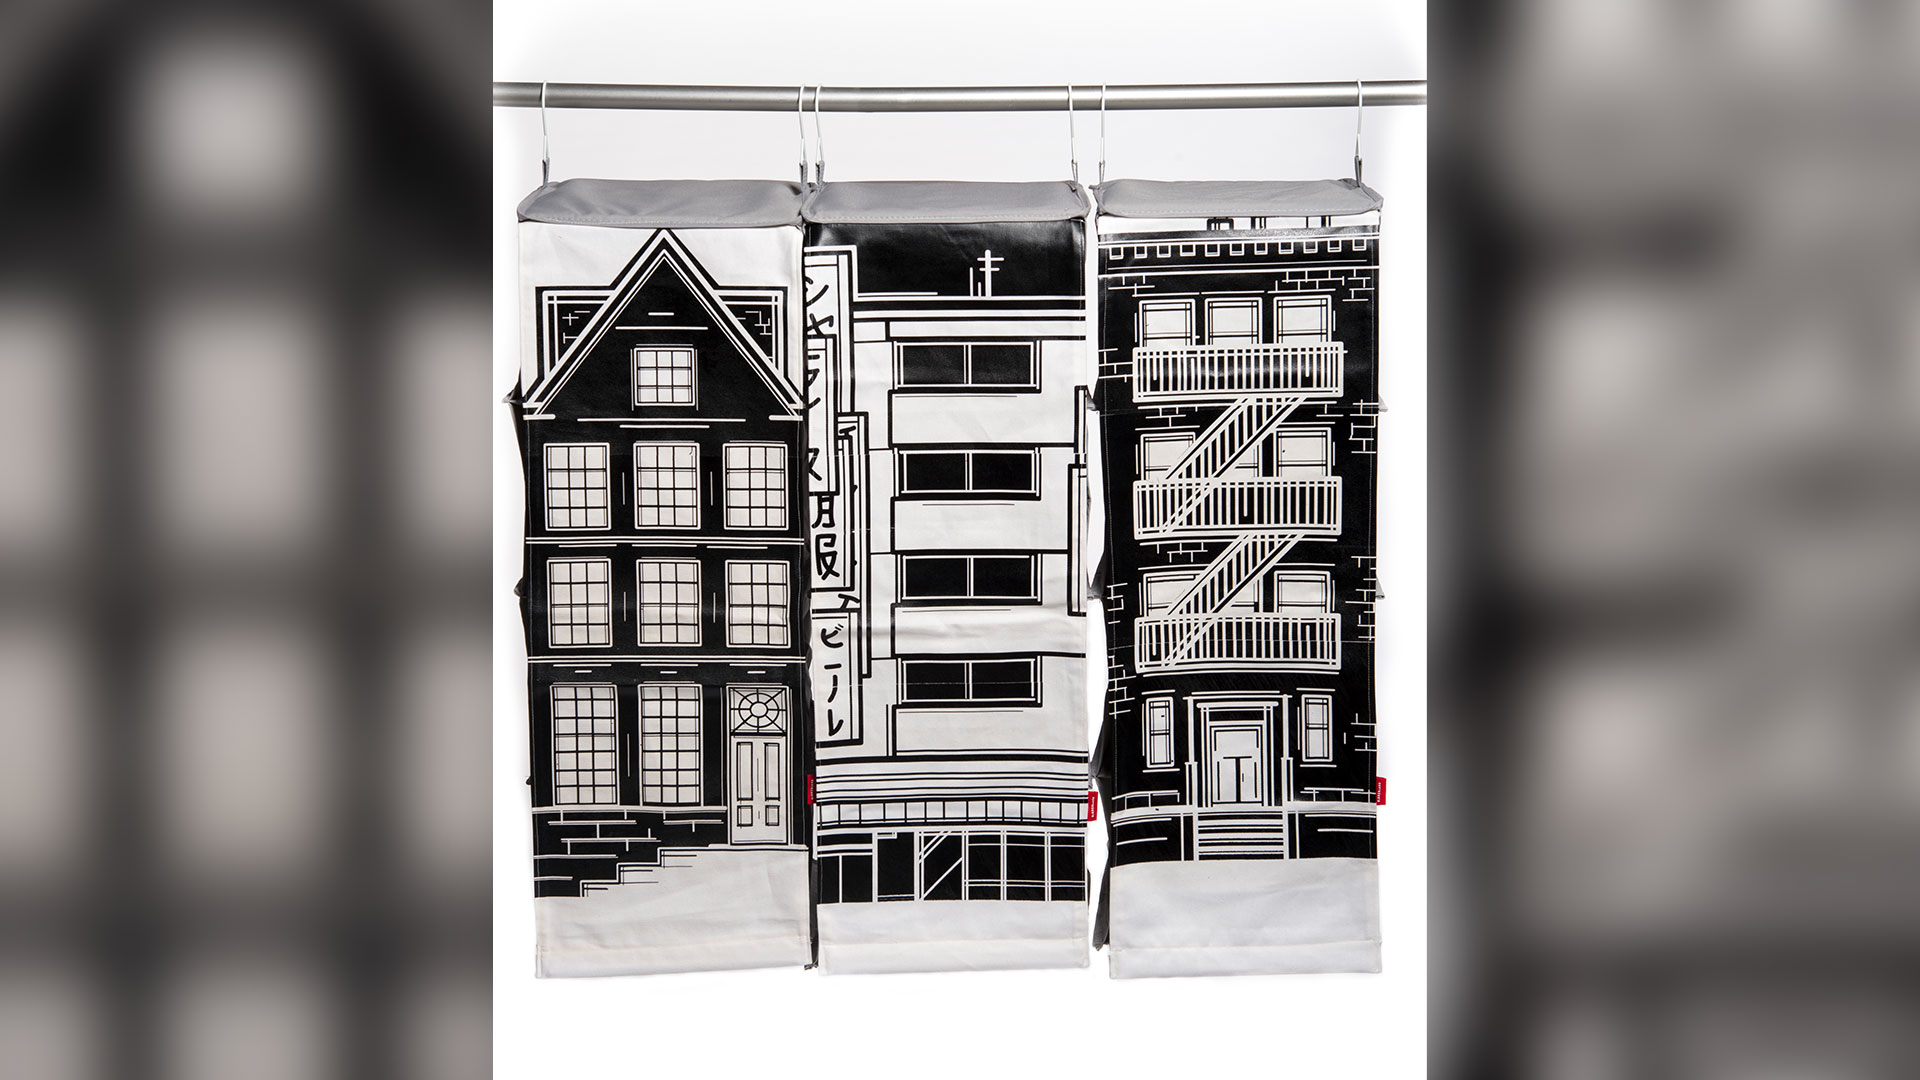 Front view of a series of 3 closet organizers hanging on long pole, each designed to look like city building facades in black and white